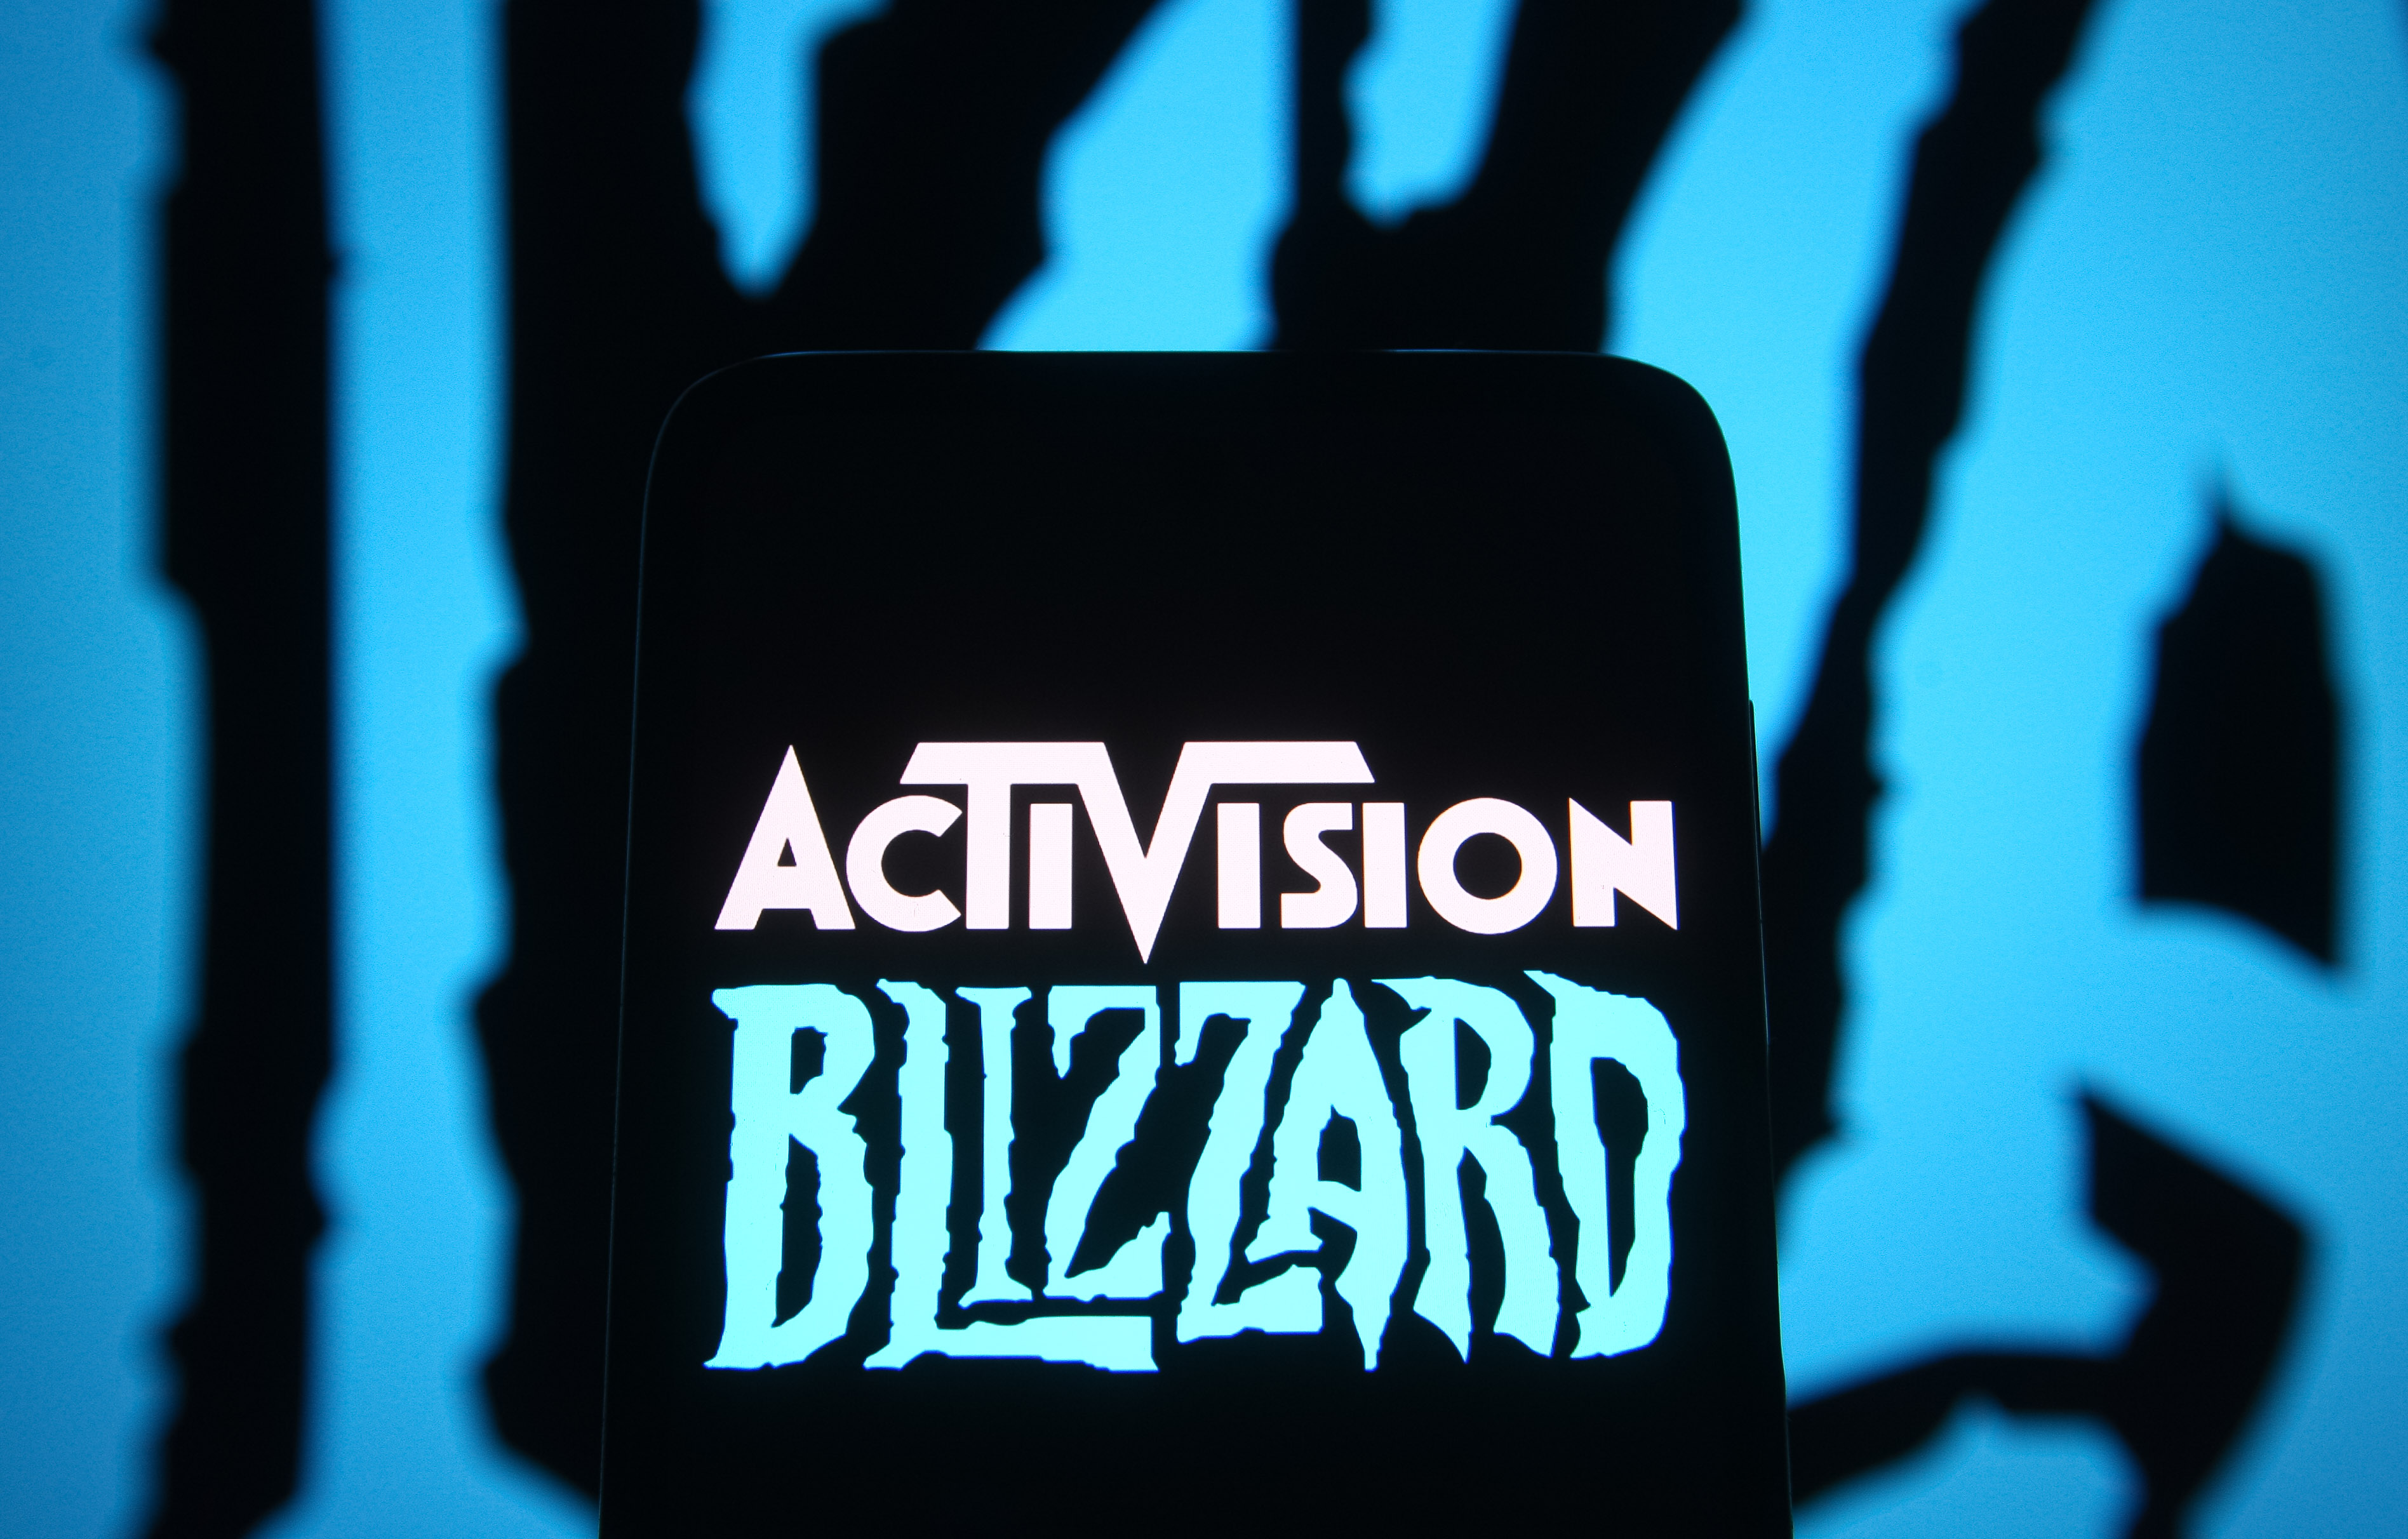 SEC opens investigation into Activision Blizzard's workplace practices